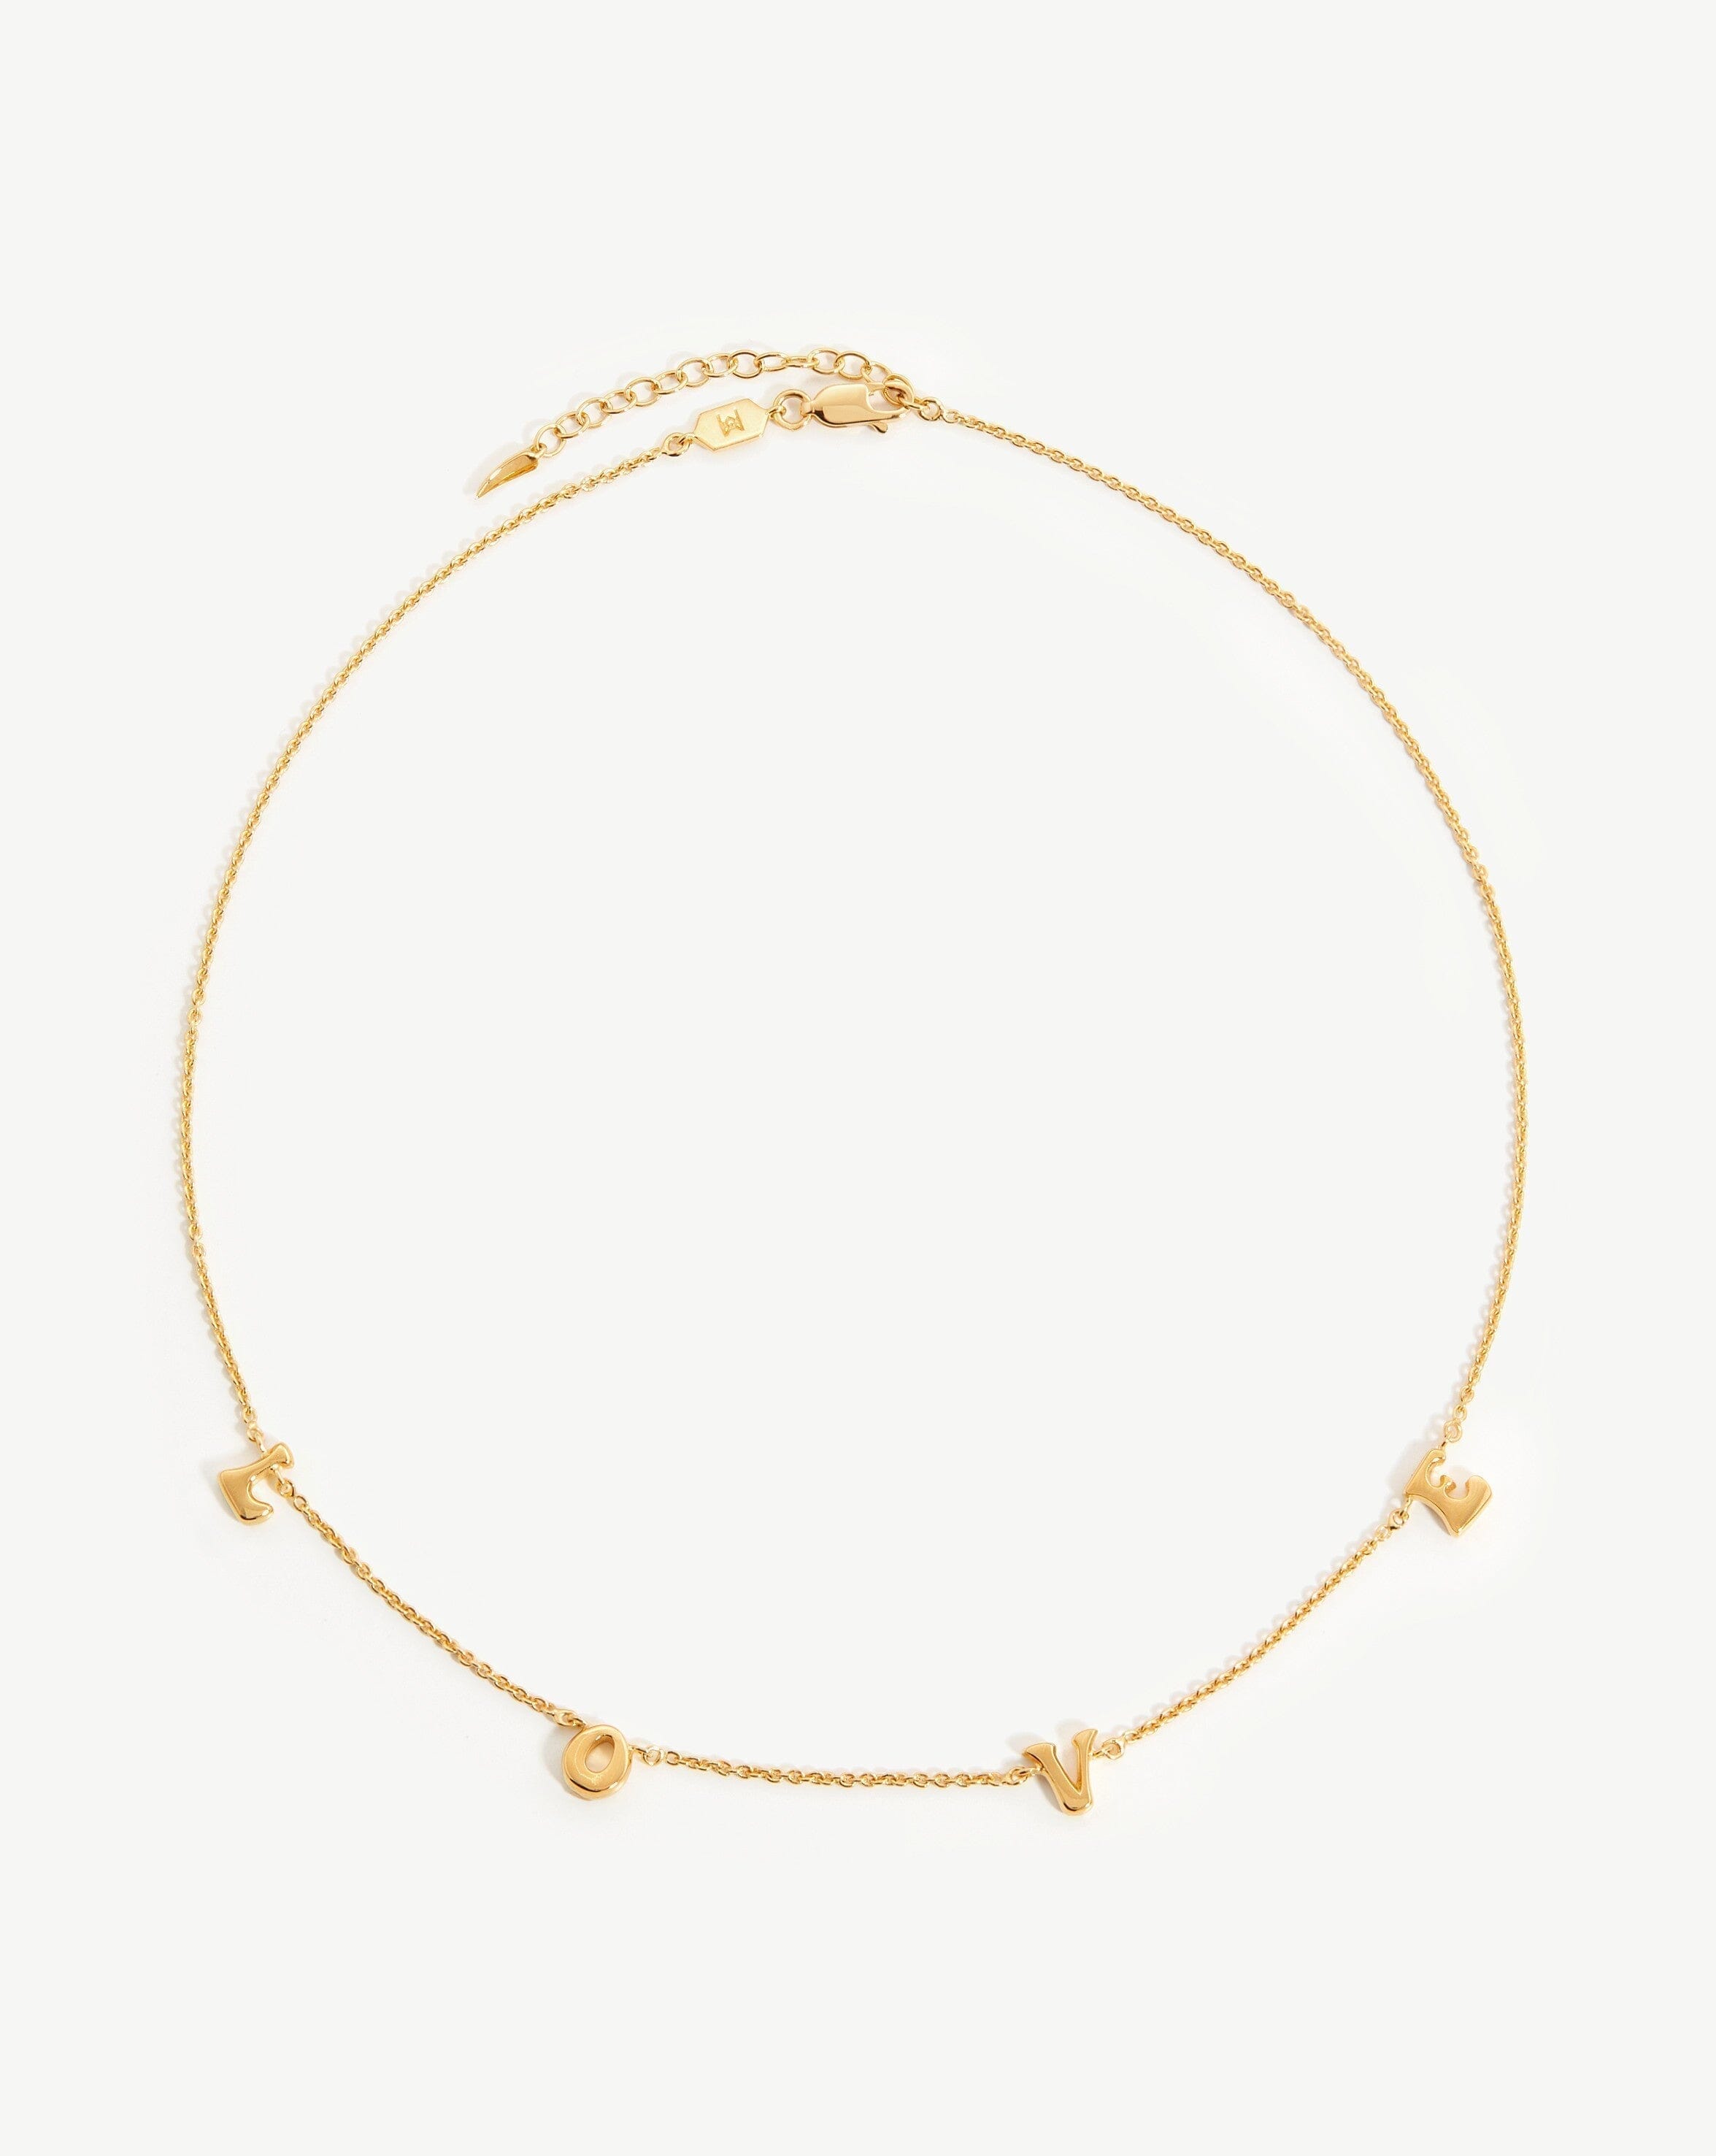 Share The Love Charm Choker Necklaces Missoma 